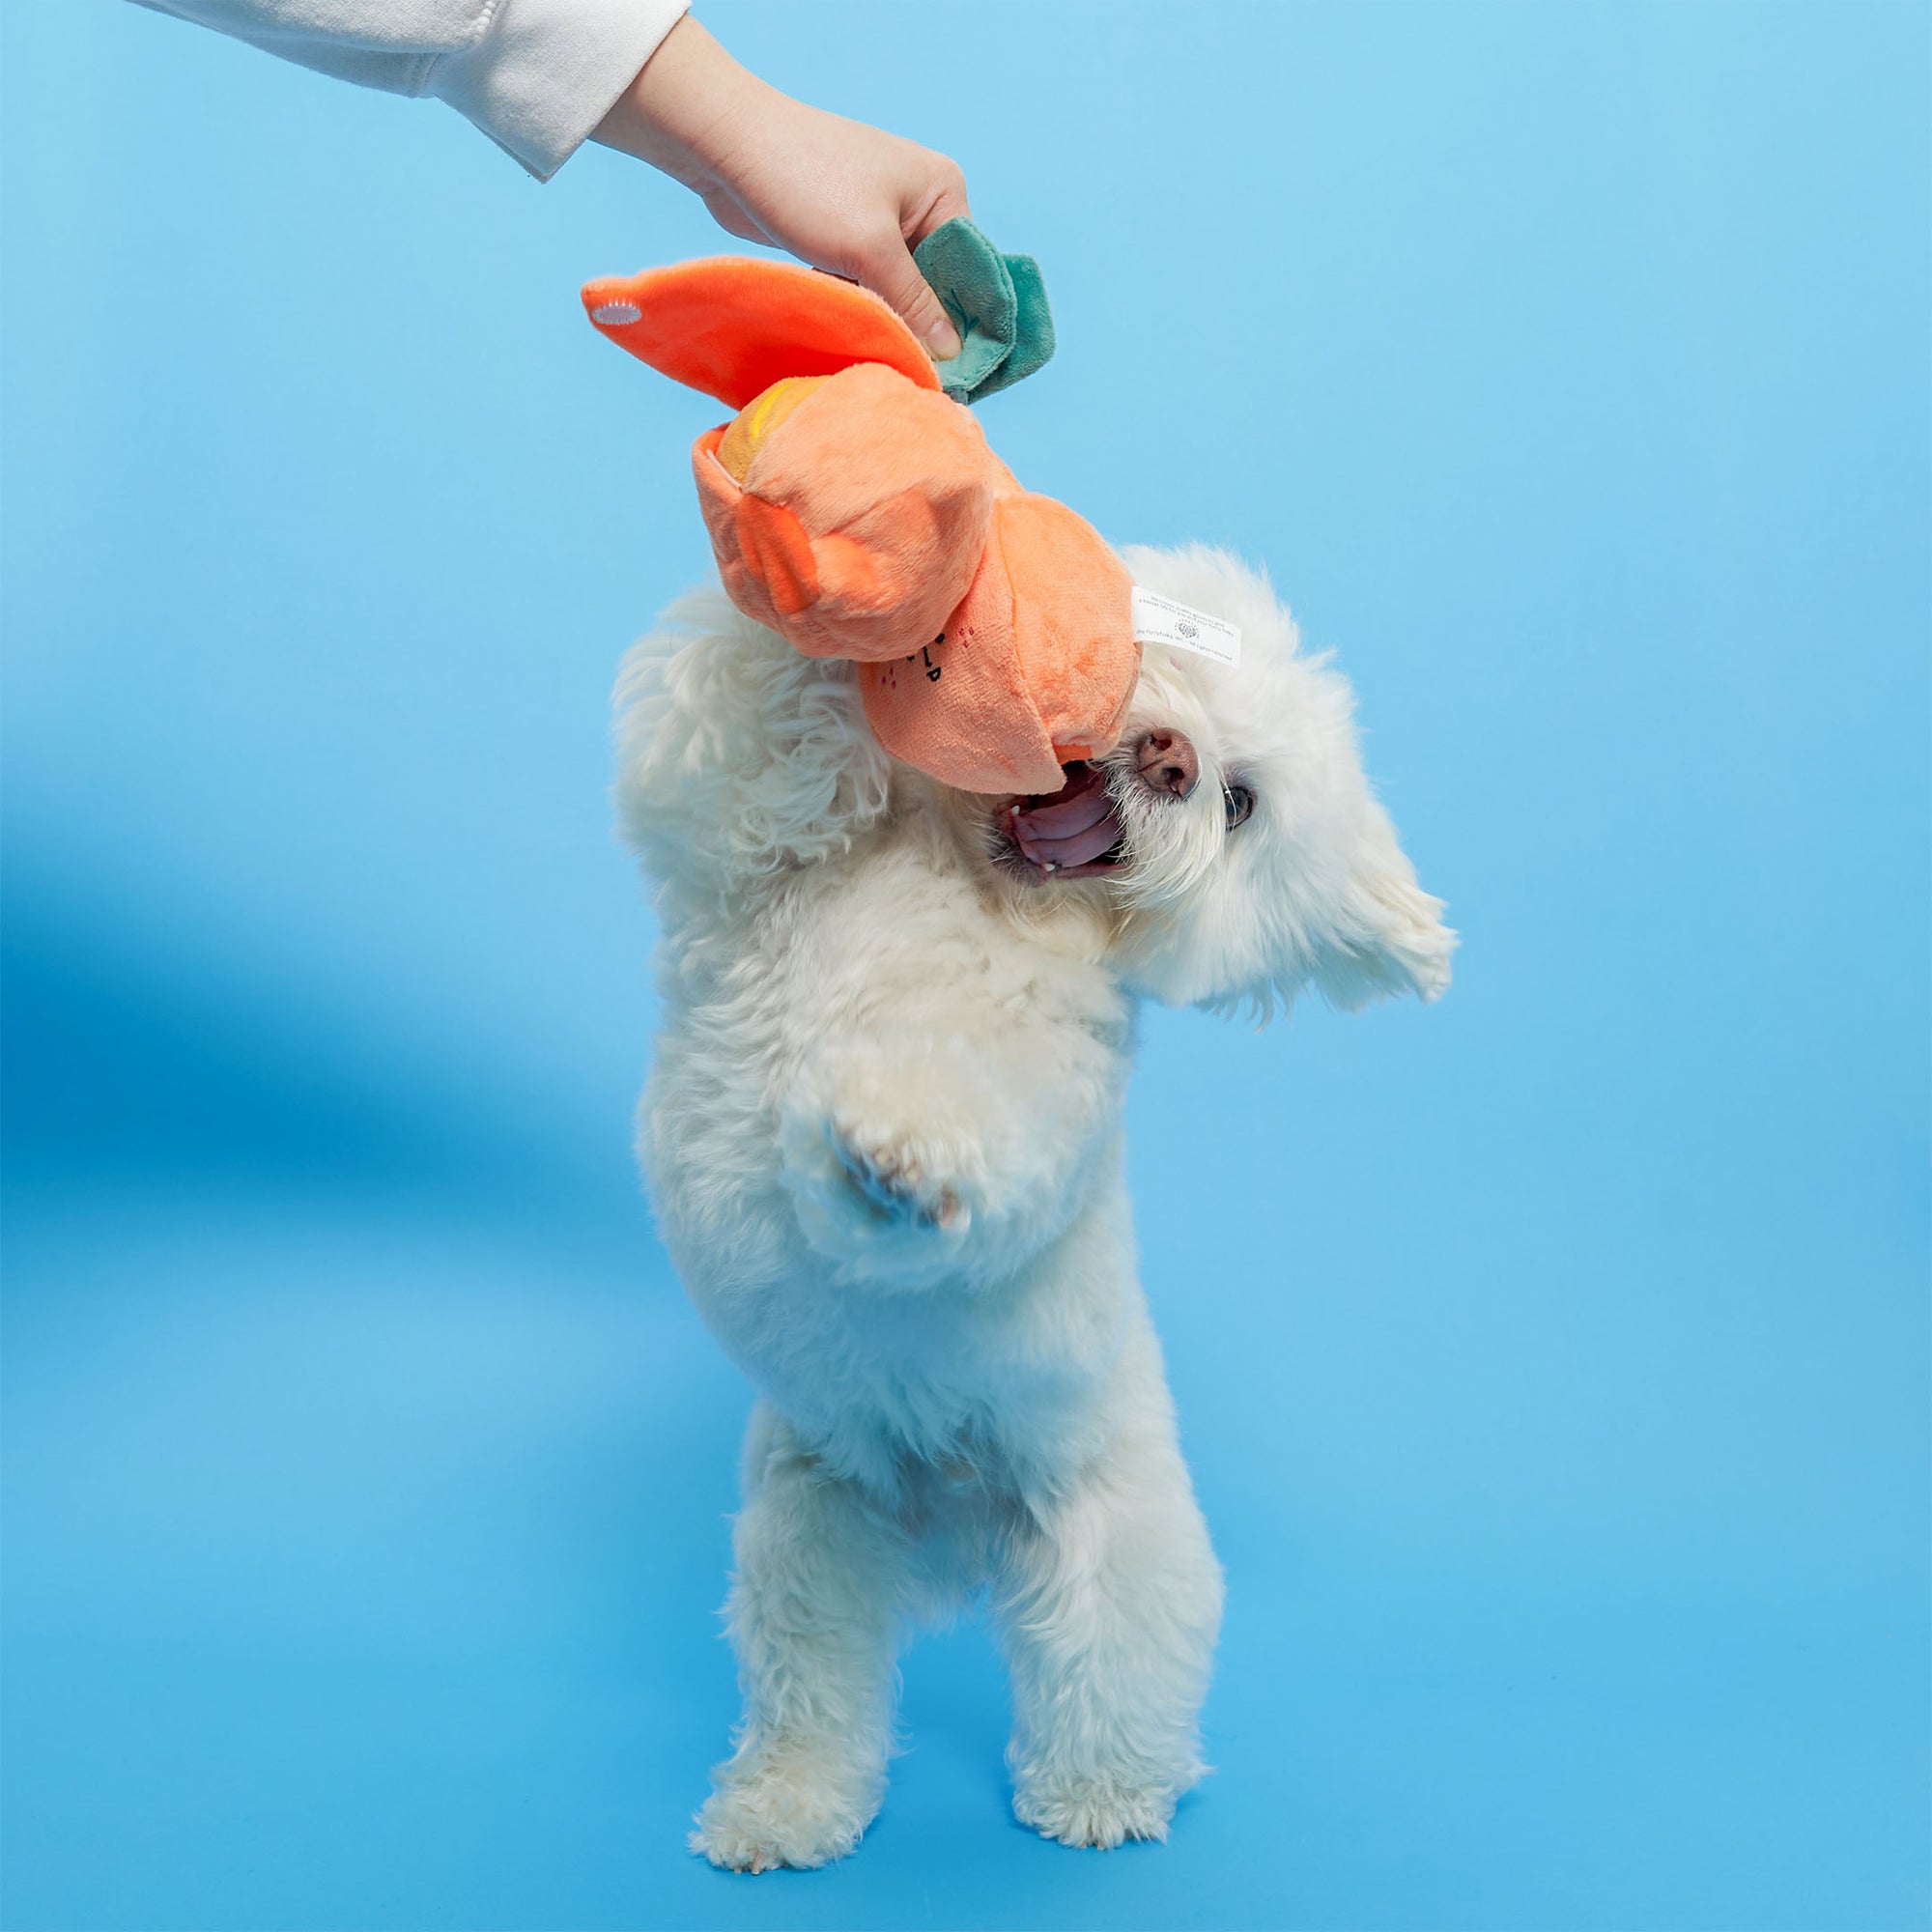 A white fluffy dog is playfully biting an orange-shaped dog toy held by a person's hand against a blue background, looking very excited and happy.